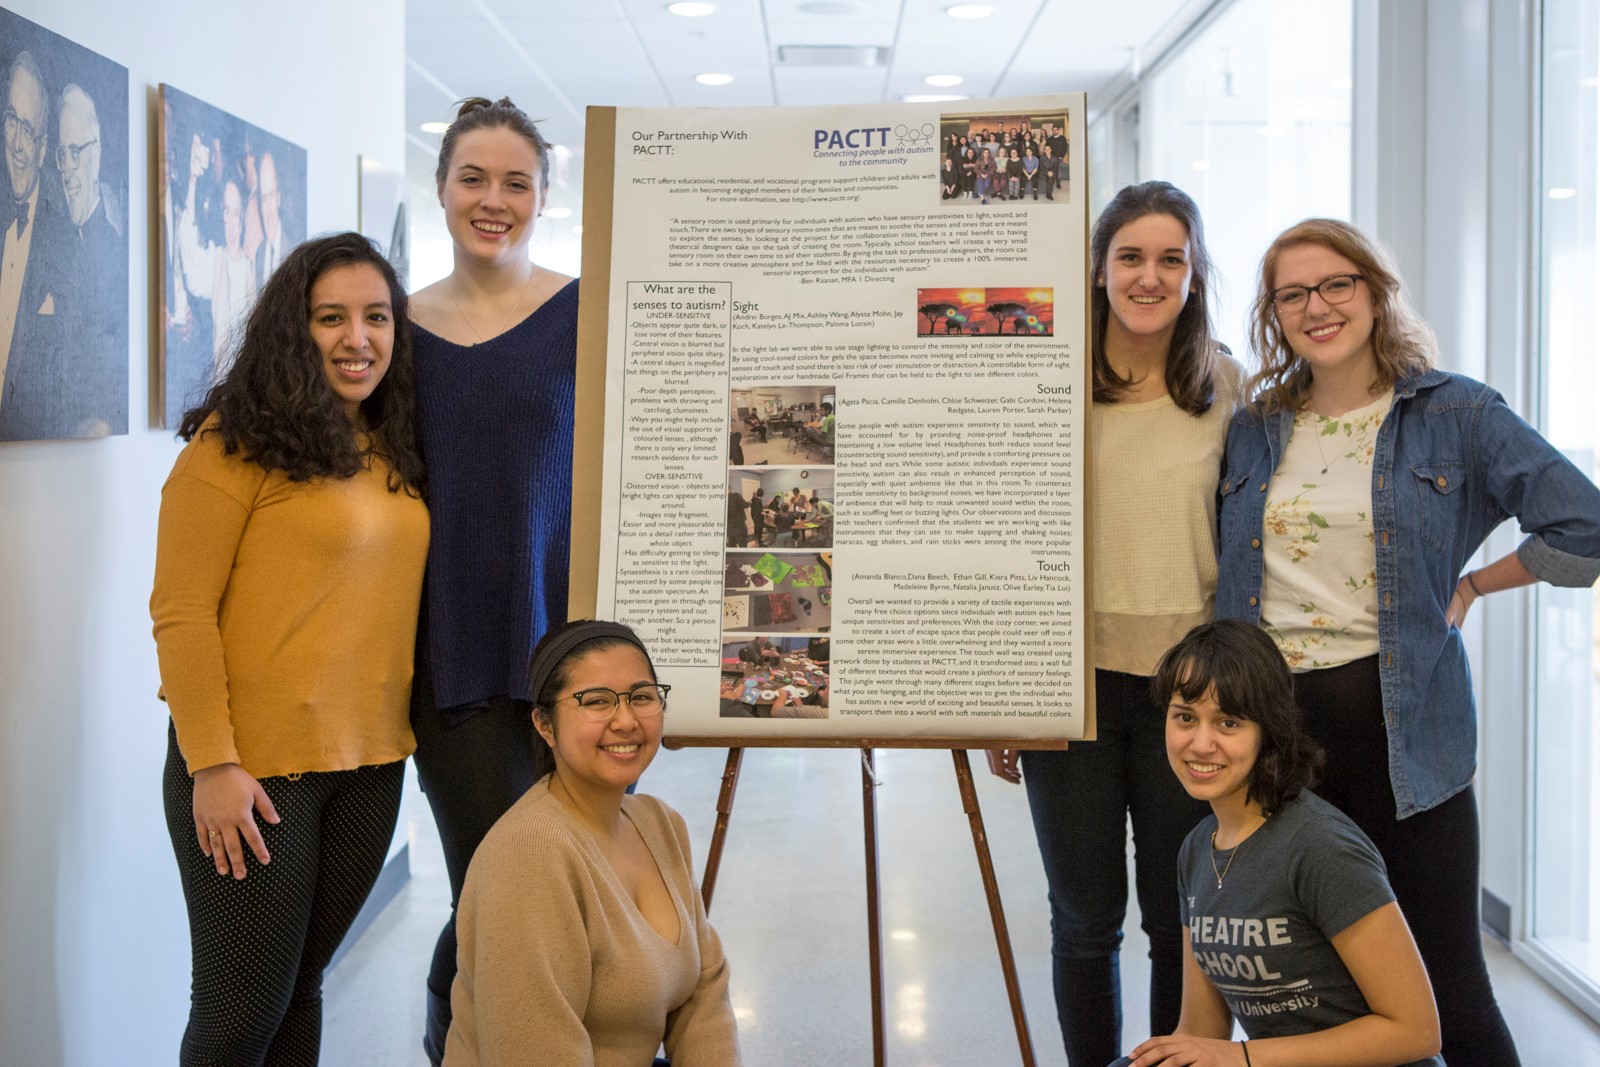 A group of students displaying their poster on community-based service learning